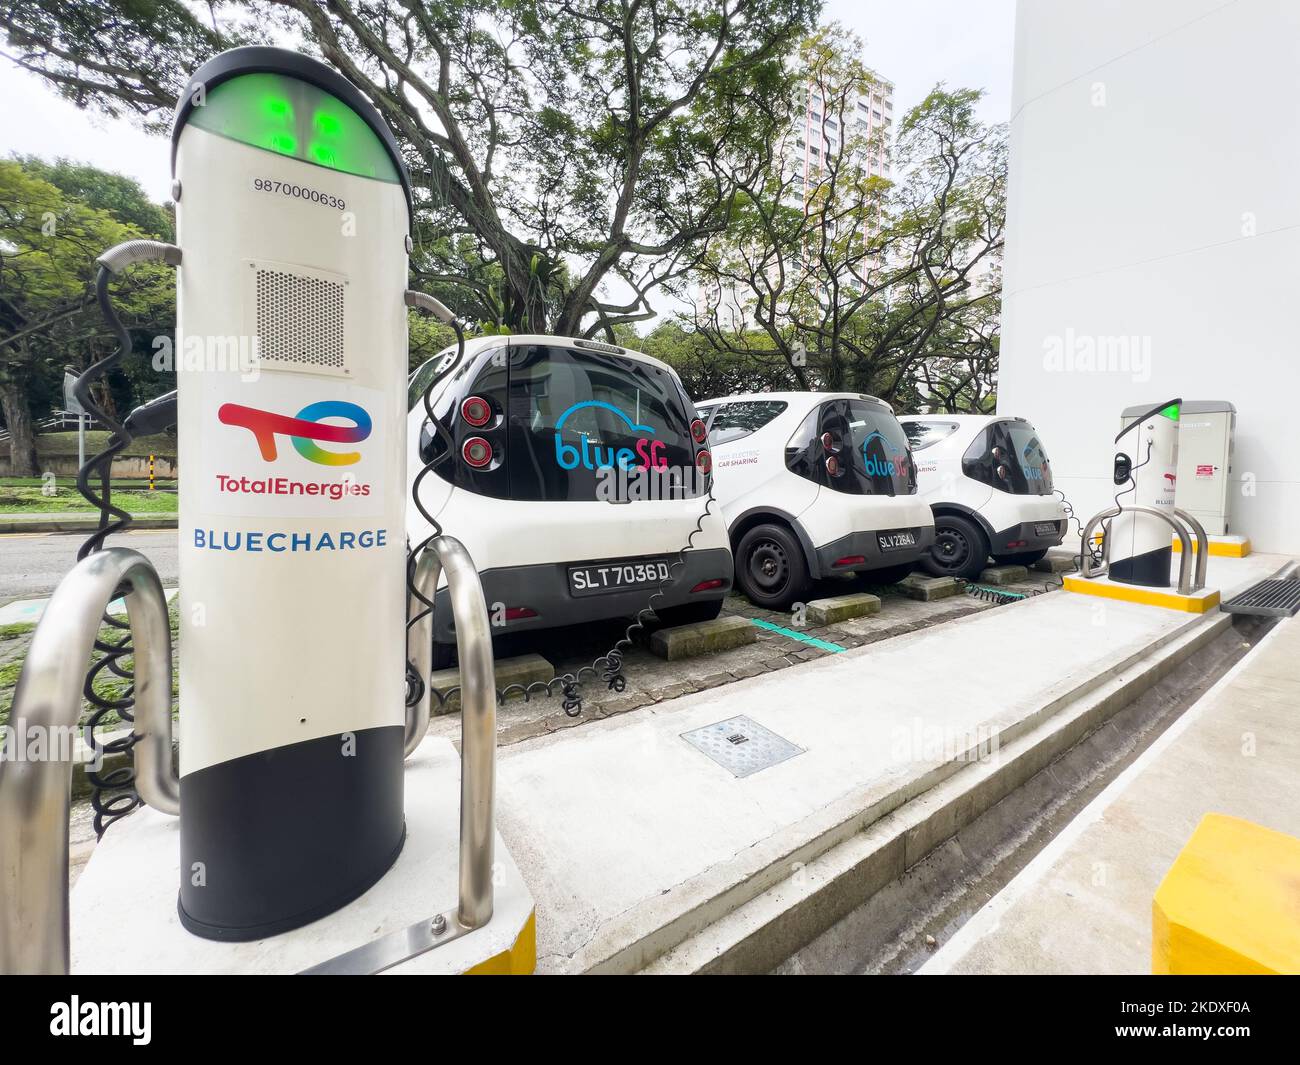 EV charging point by TotalEnergies to support electric cars at a carpark venue. Singapore Stock Photo